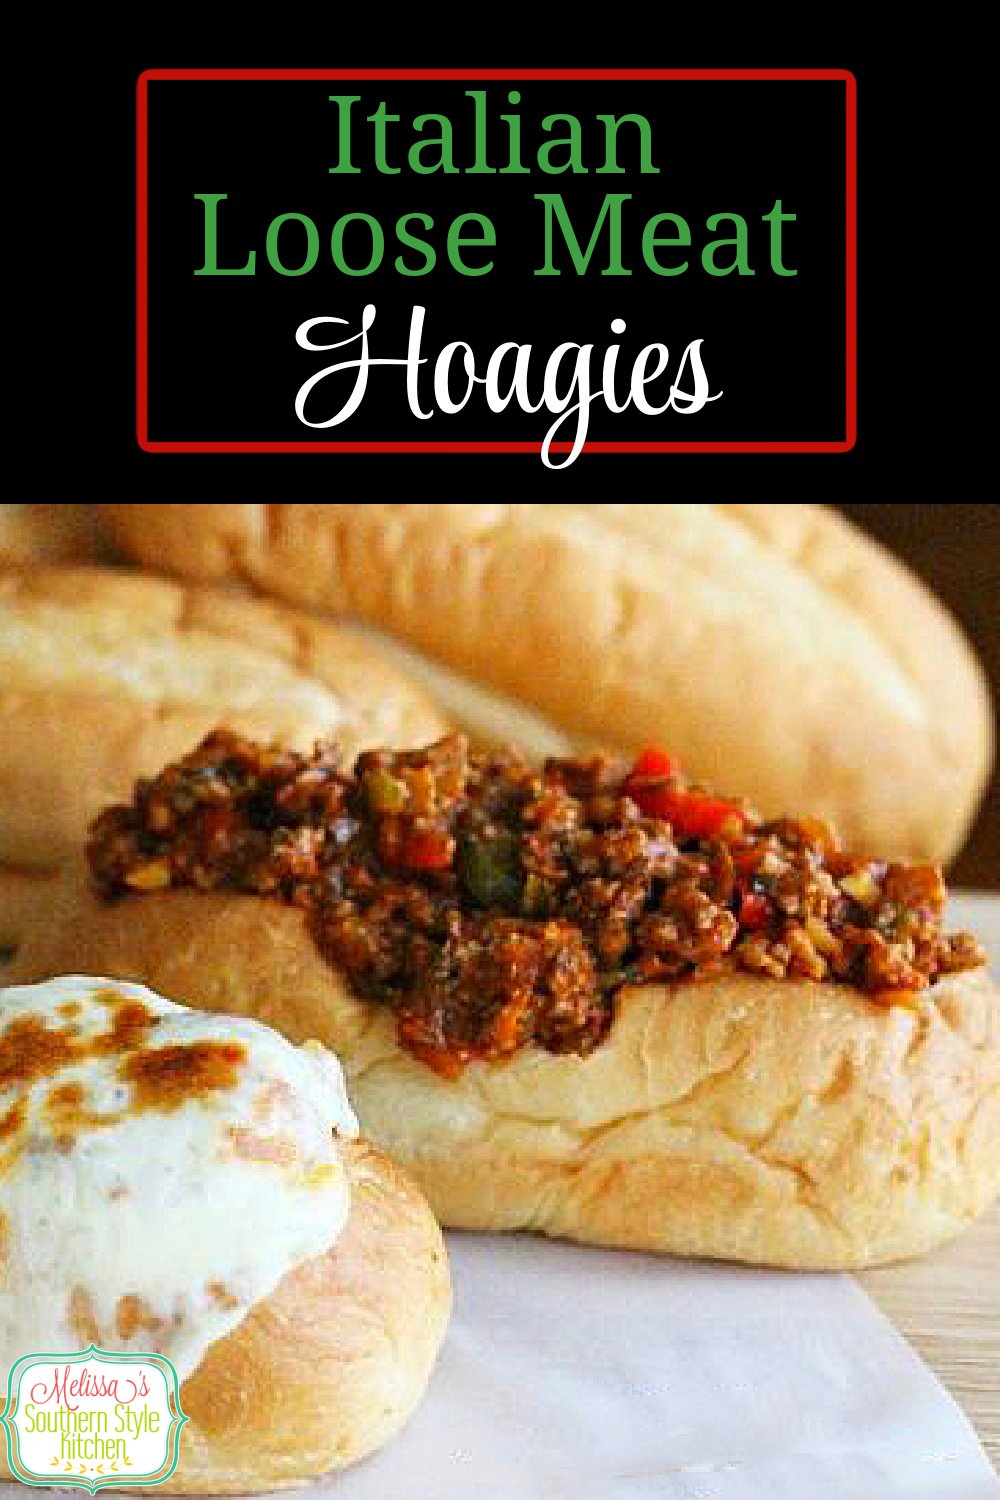 The family will come running for these Italian Loose Meat Hoagies served on warm hoagie rolls topped with gooey melted cheese #hoagies #easygroundbeefrecipes #italianhoagies #italiansubs #groundbeef #italiansloppyjoes #loosemeathoagies #sloppyjoesrecipes via @melissasssk